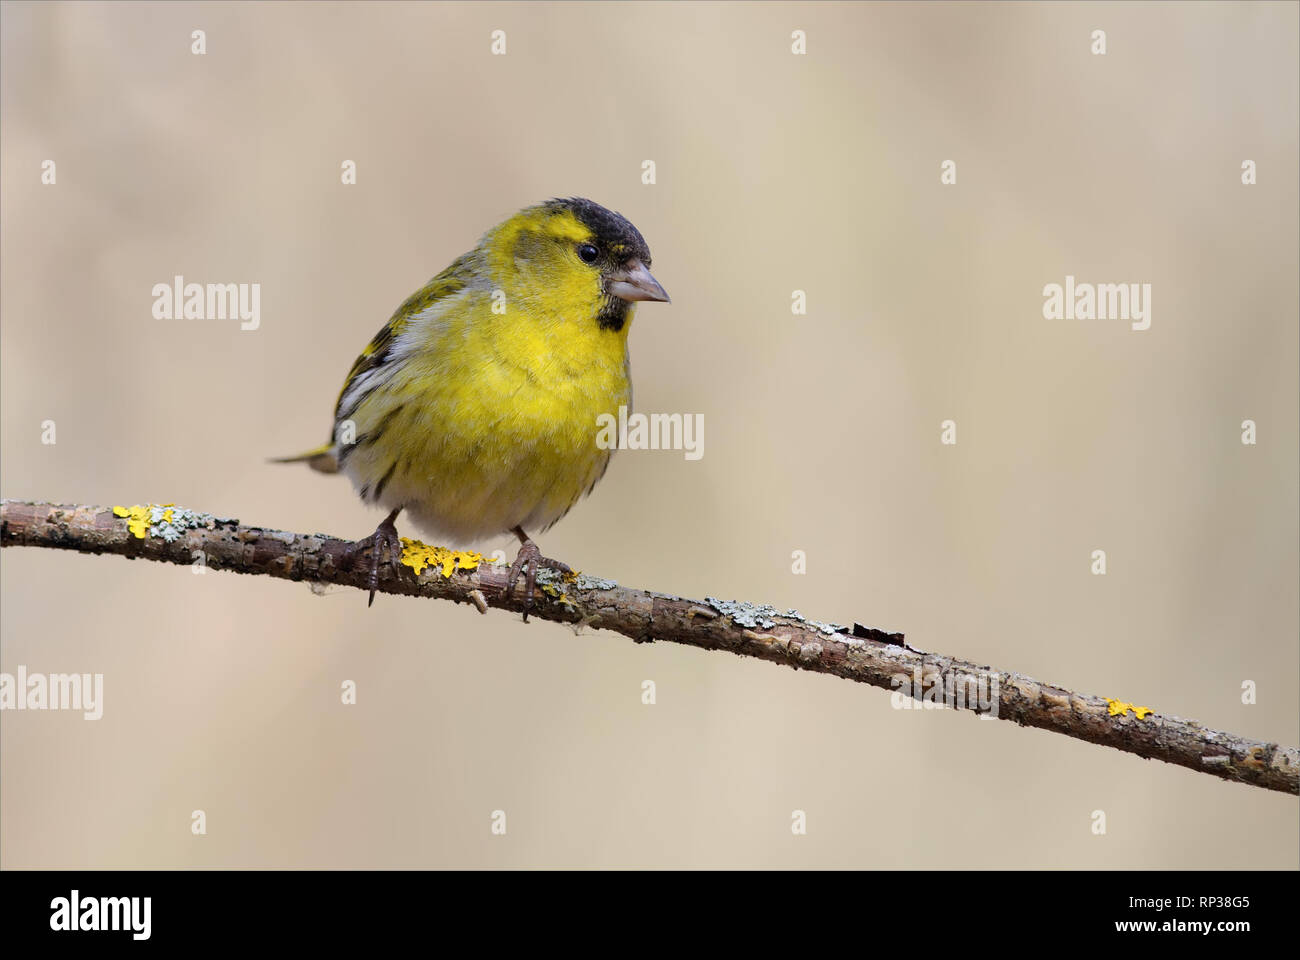 Male Eurasian siskin perched on a thin branch Stock Photo